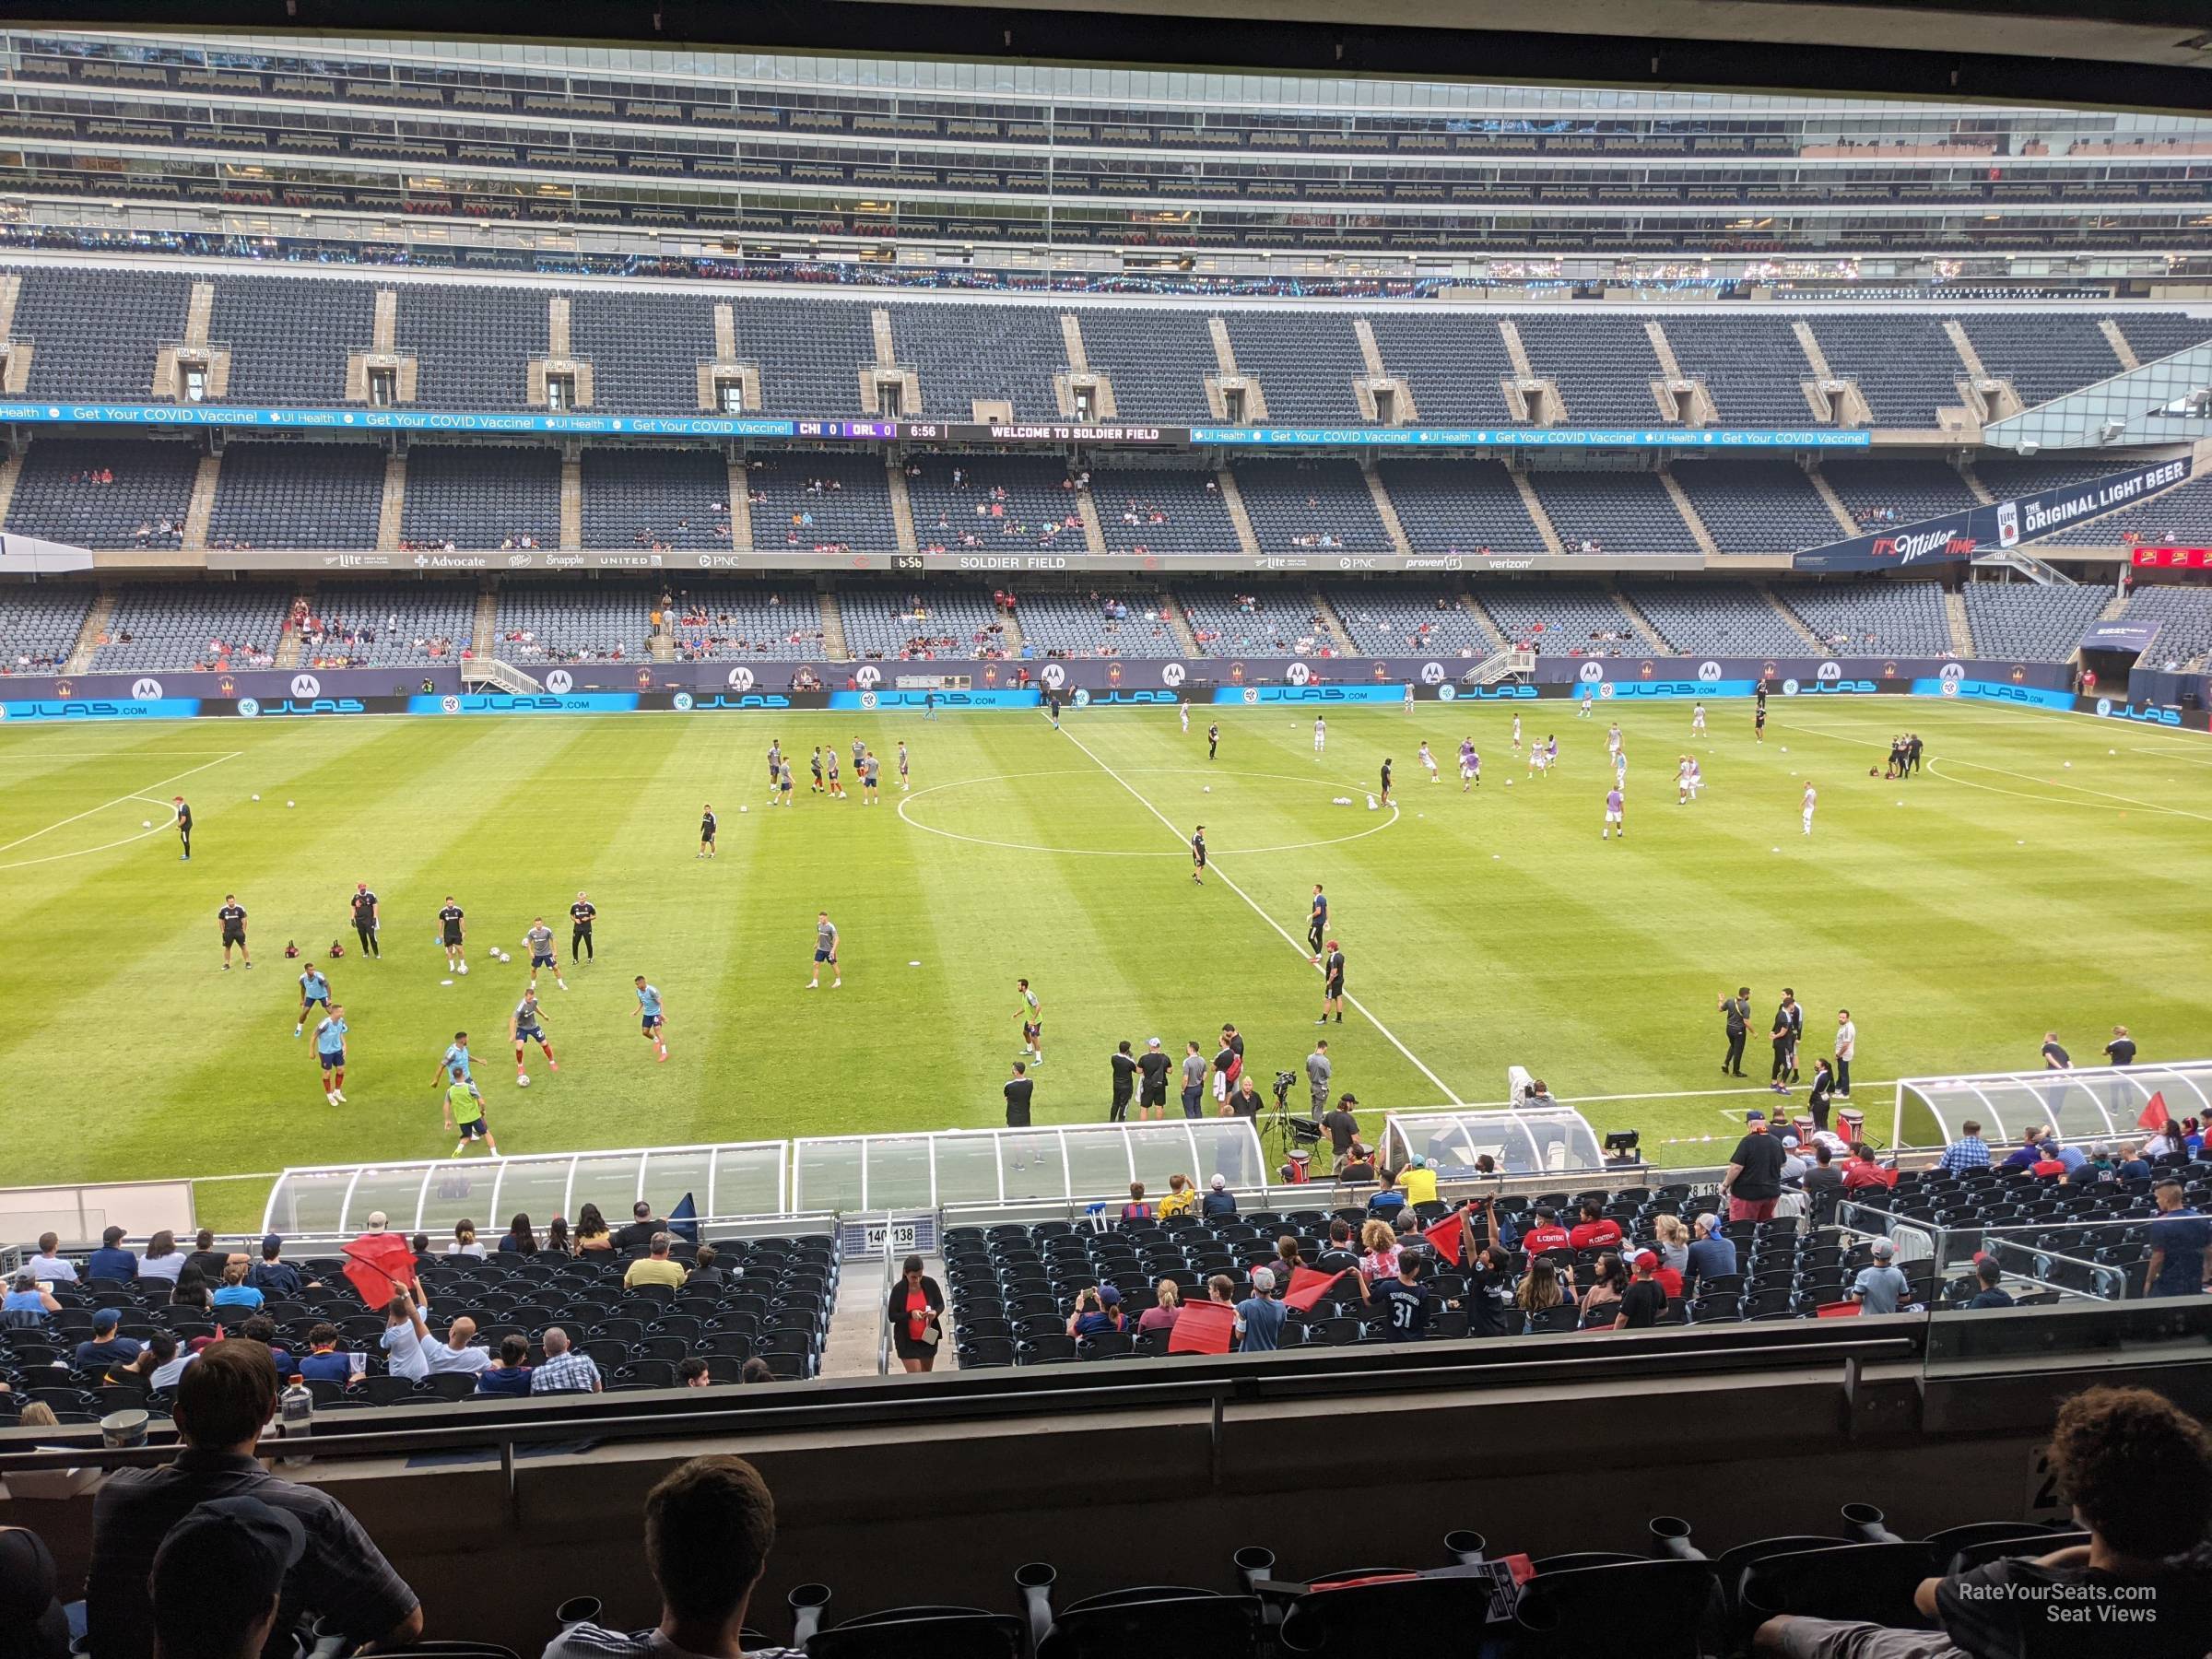 section 239, row 6 seat view  for soccer - soldier field